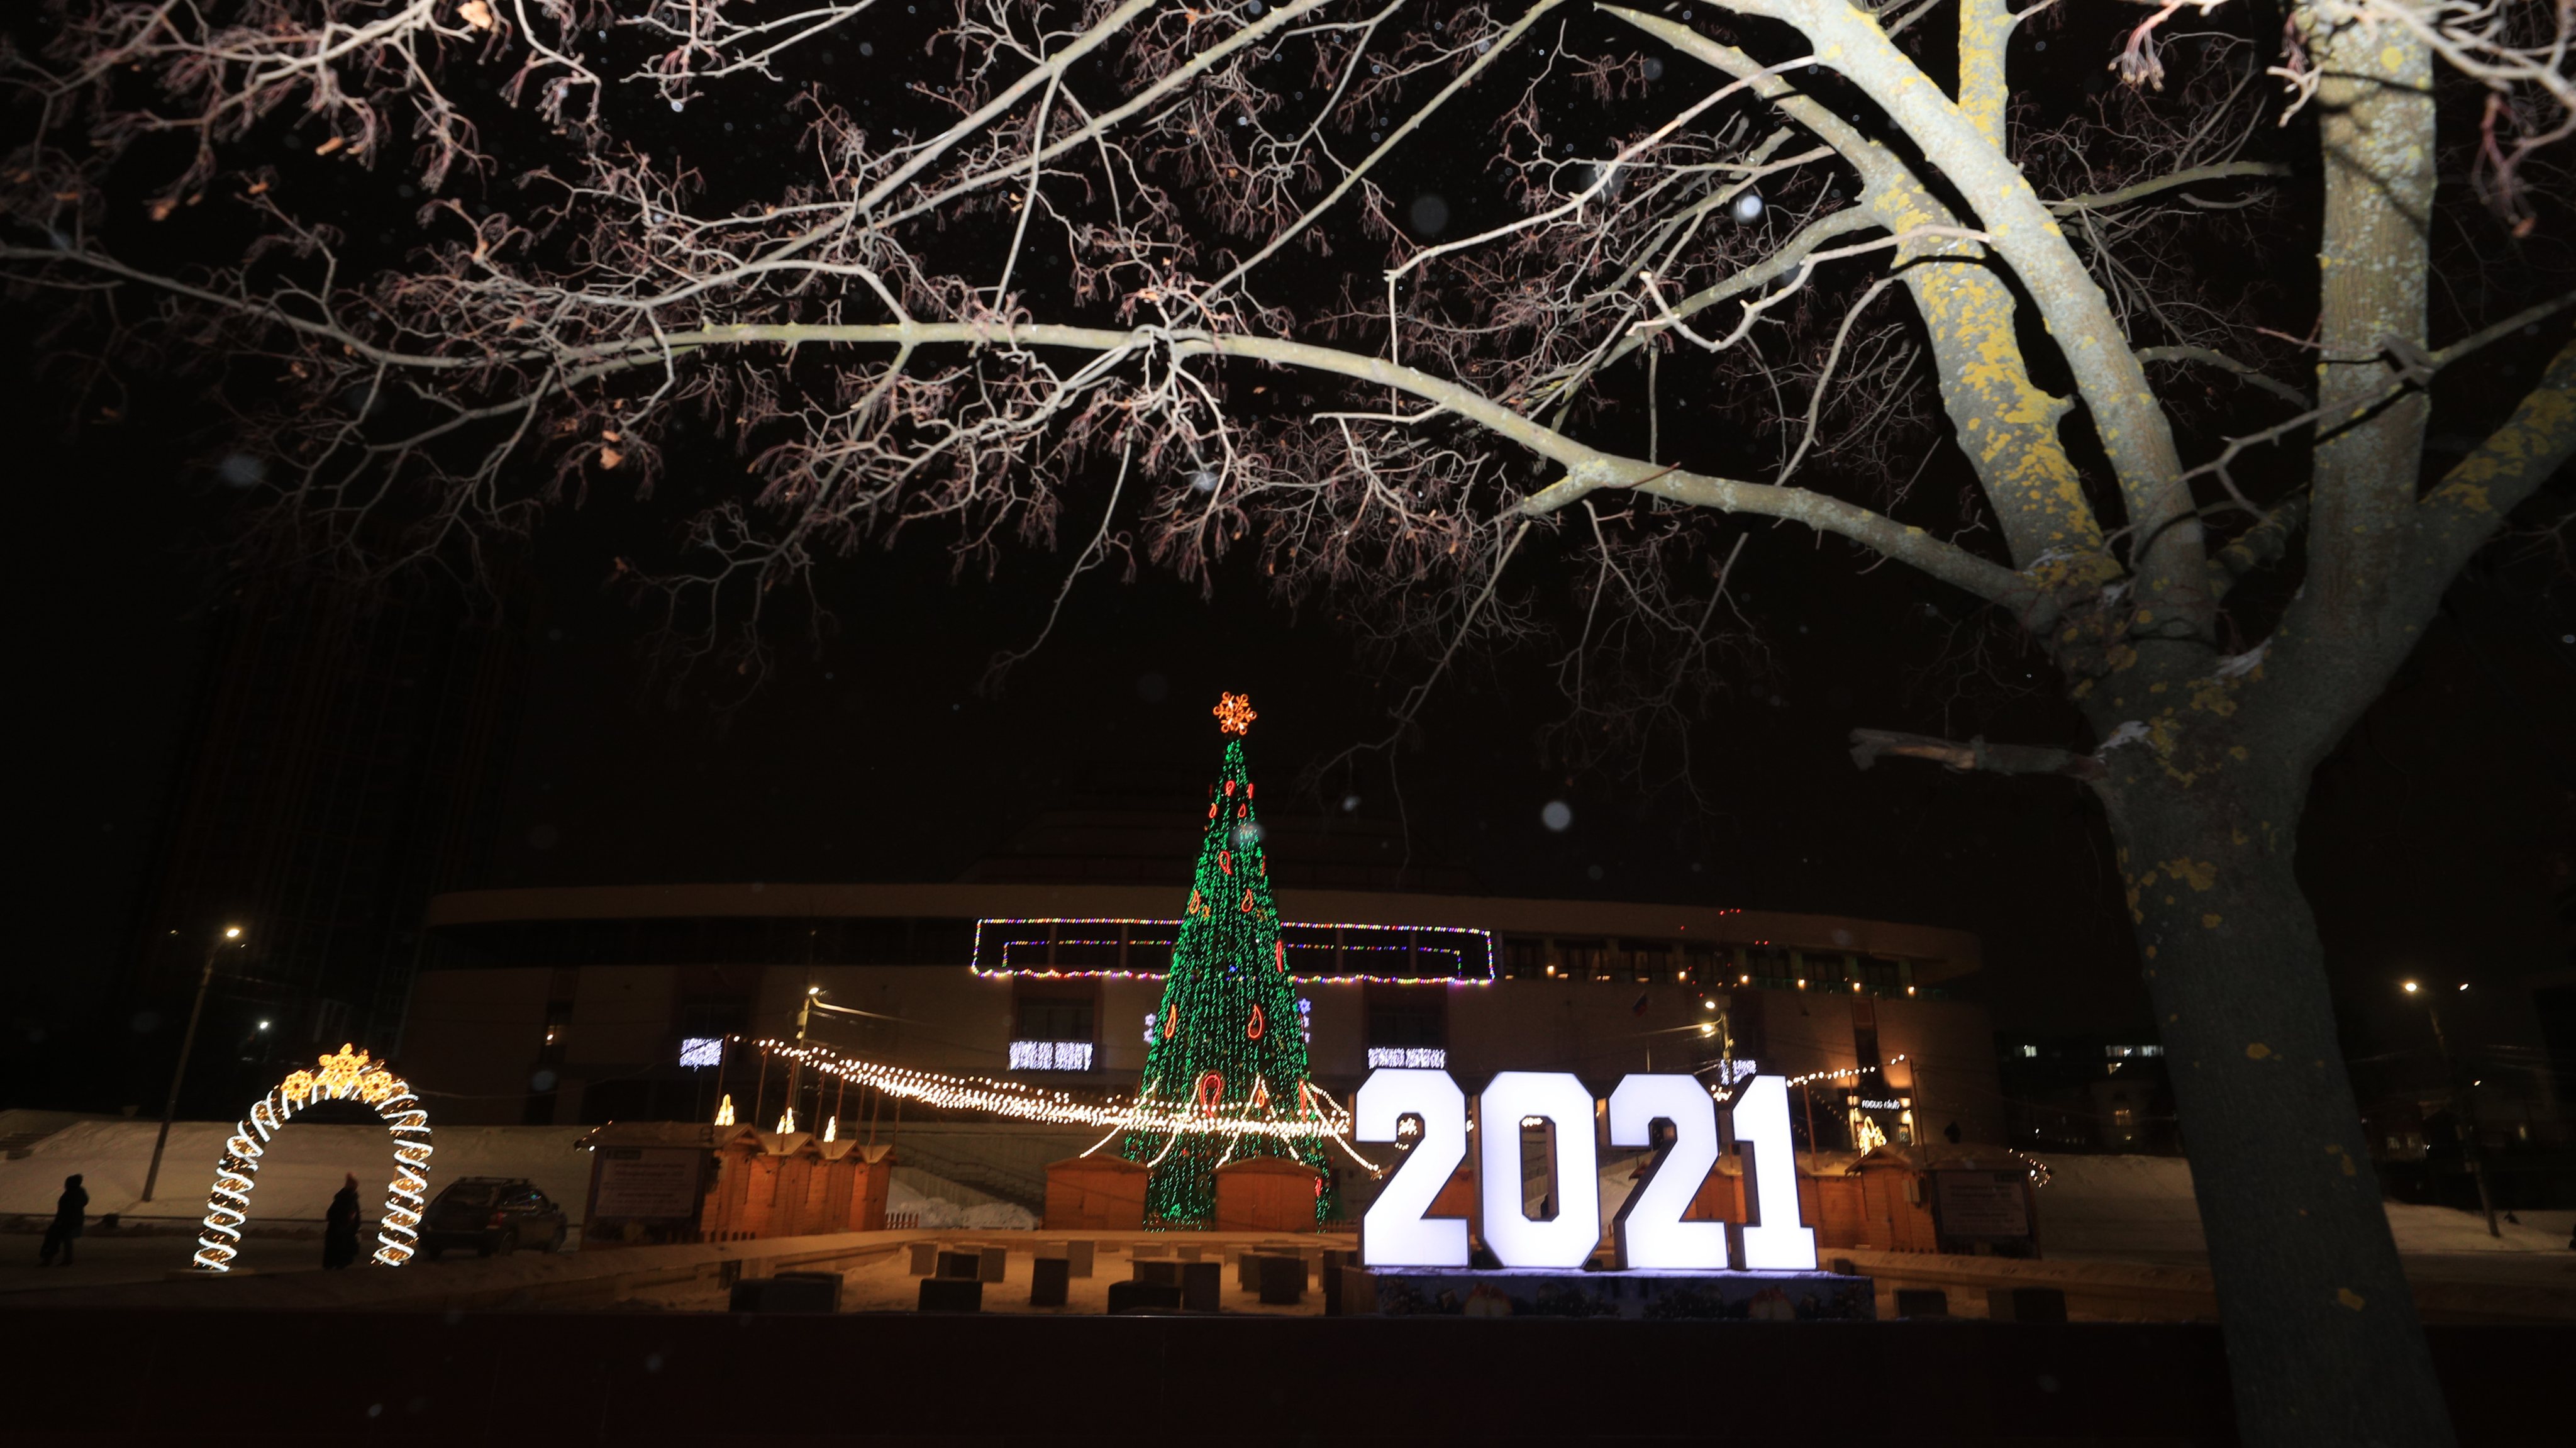 Russian city of Ivanovo decorated for winter holidays